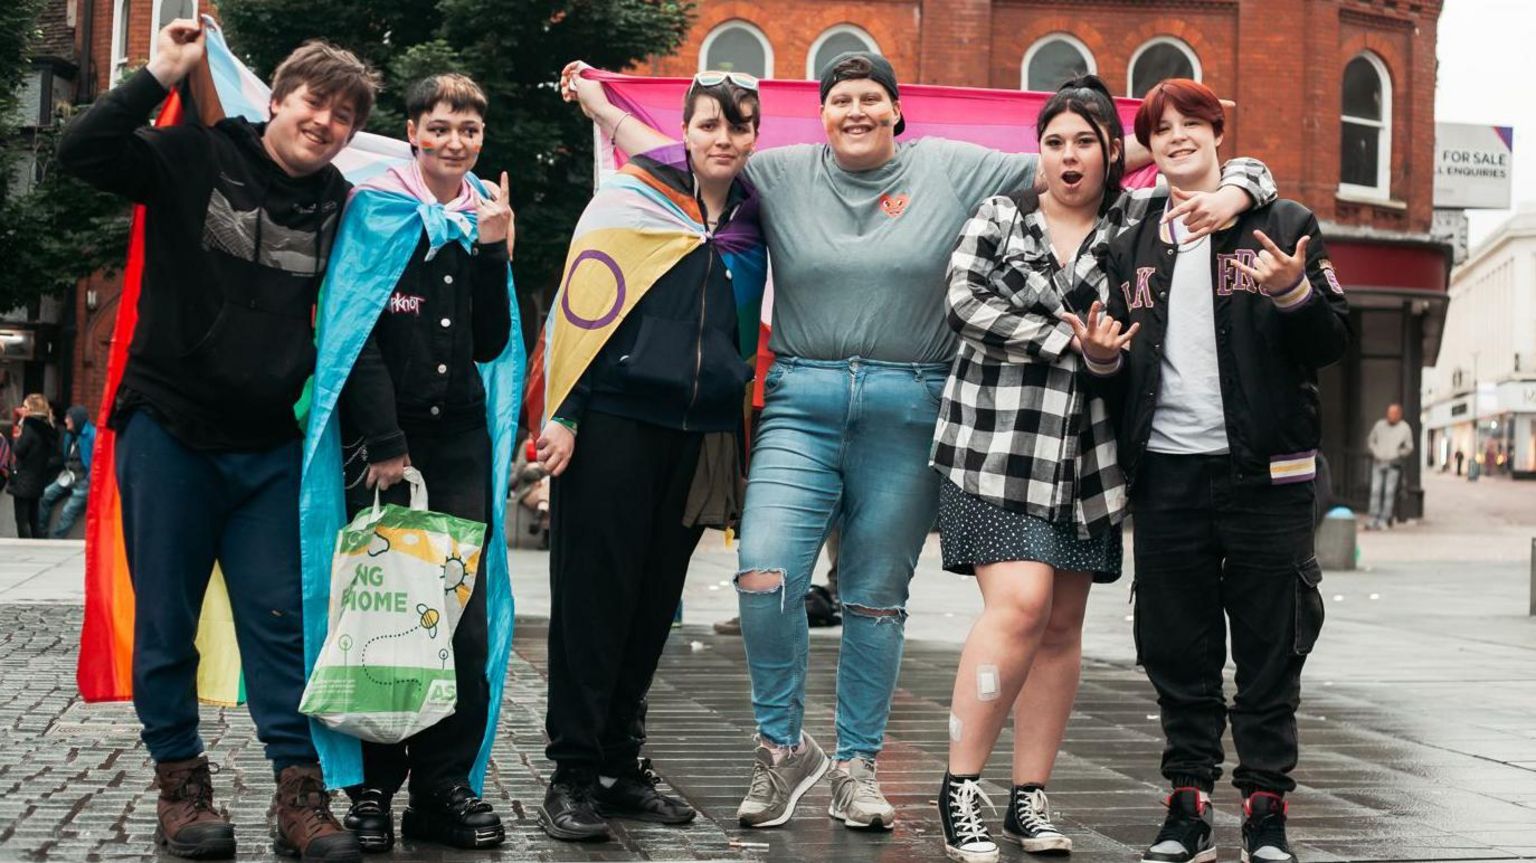 A group of six people holding Pride flags